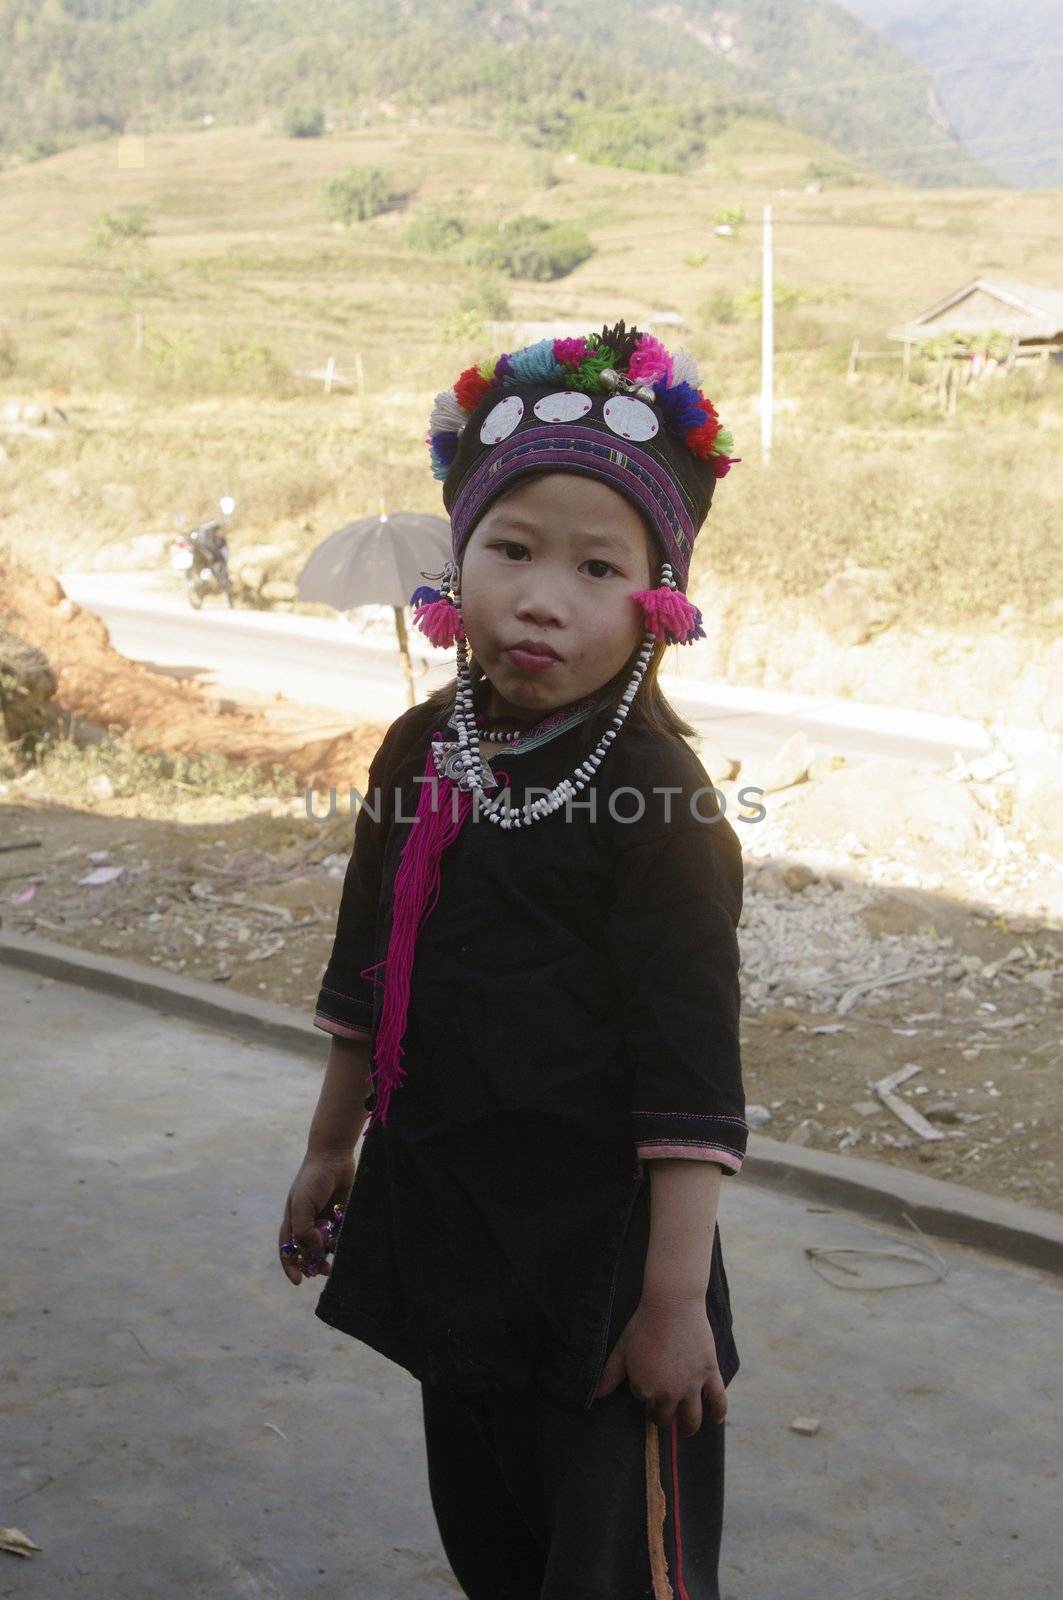 Black is also the color of clothing for children. This little boyl is wearing a cap embroidered with multicolored wool tassels.